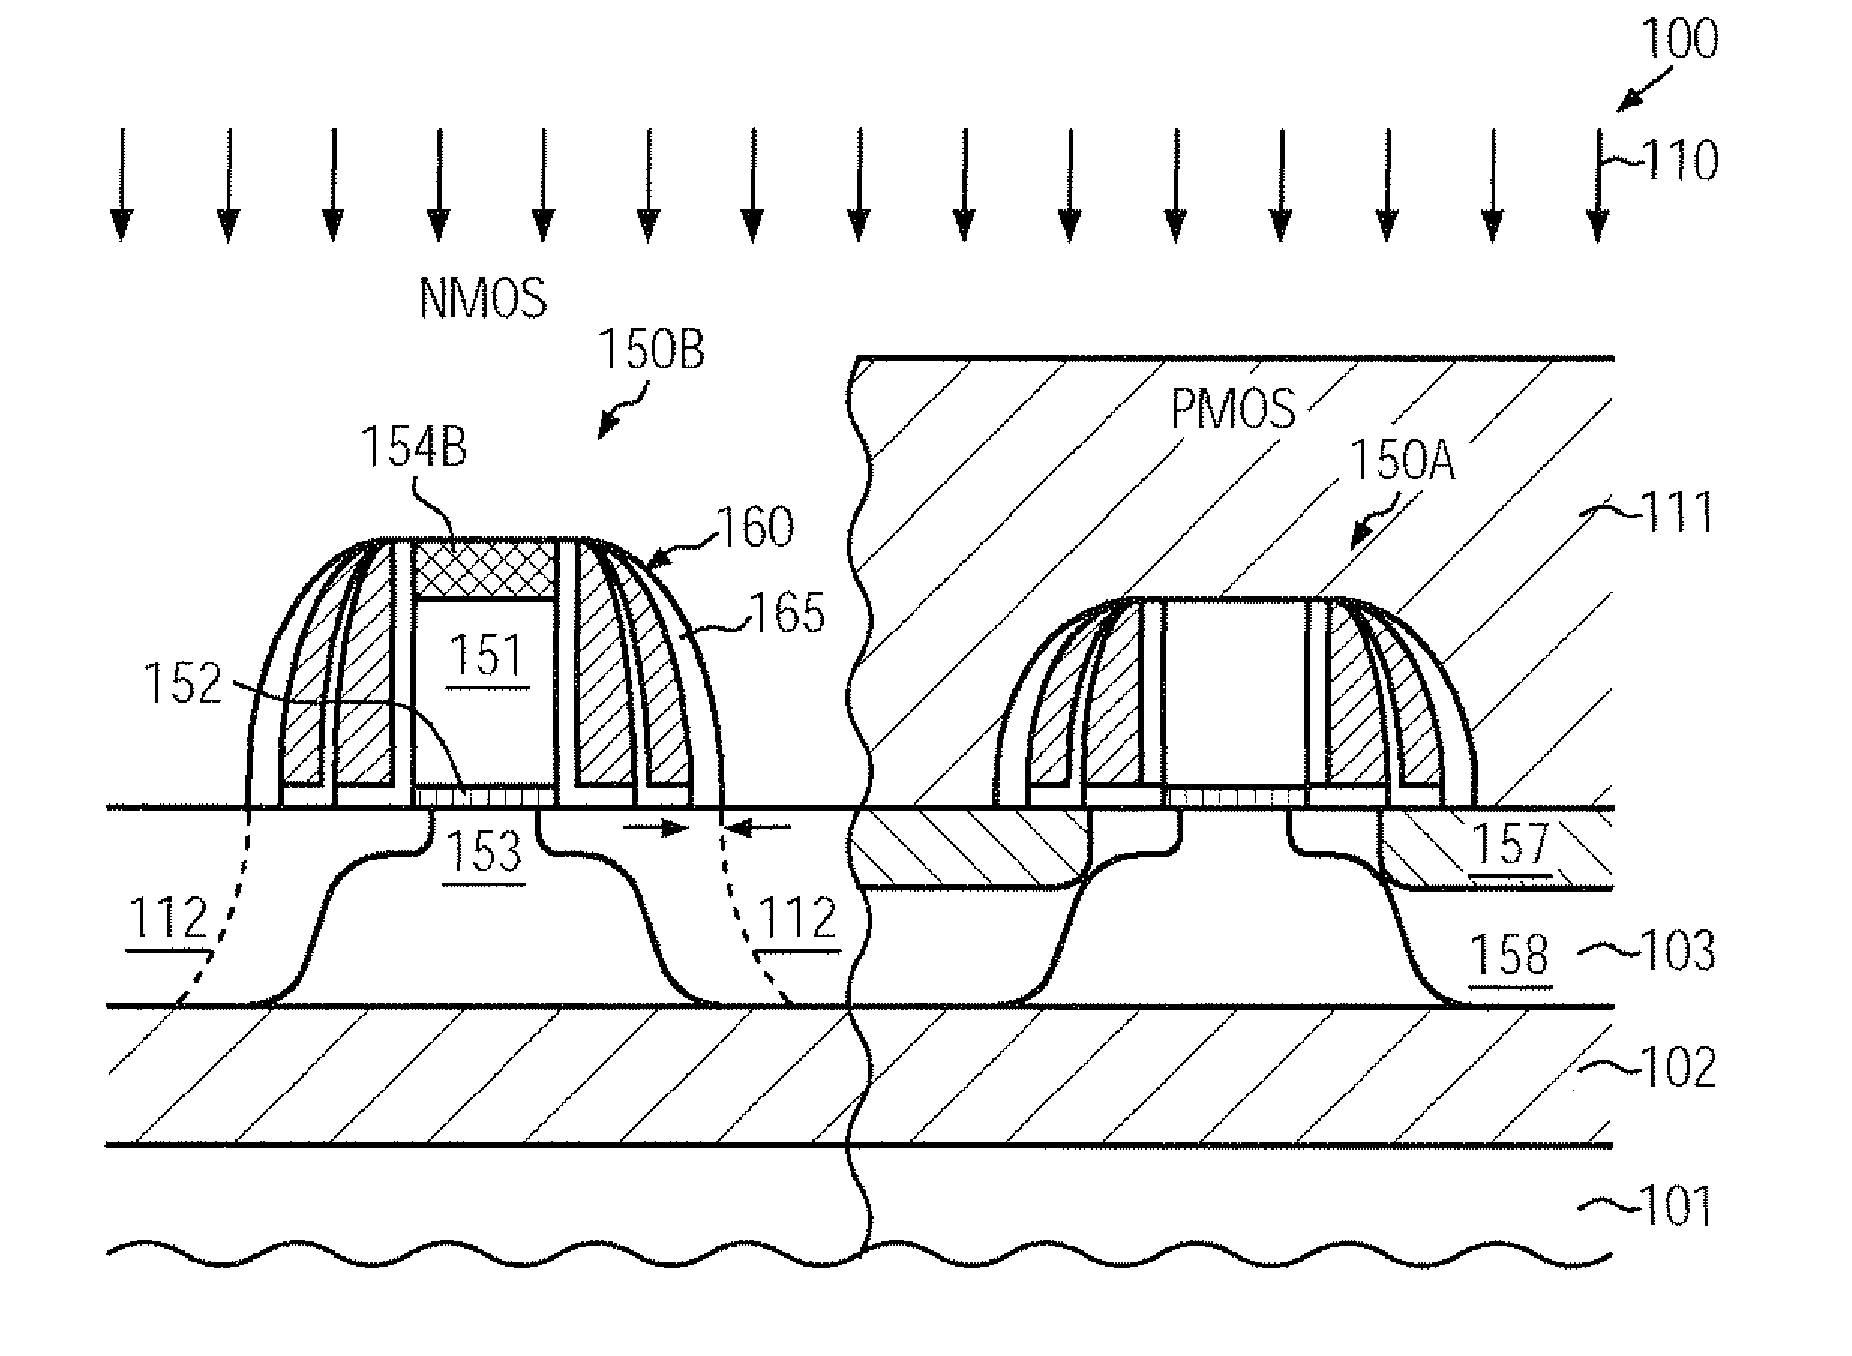 CMOS device comprising an nmos transistor with recessed drain and source areas and a pmos transistor having a silicon/germanium material in the drain and source areas